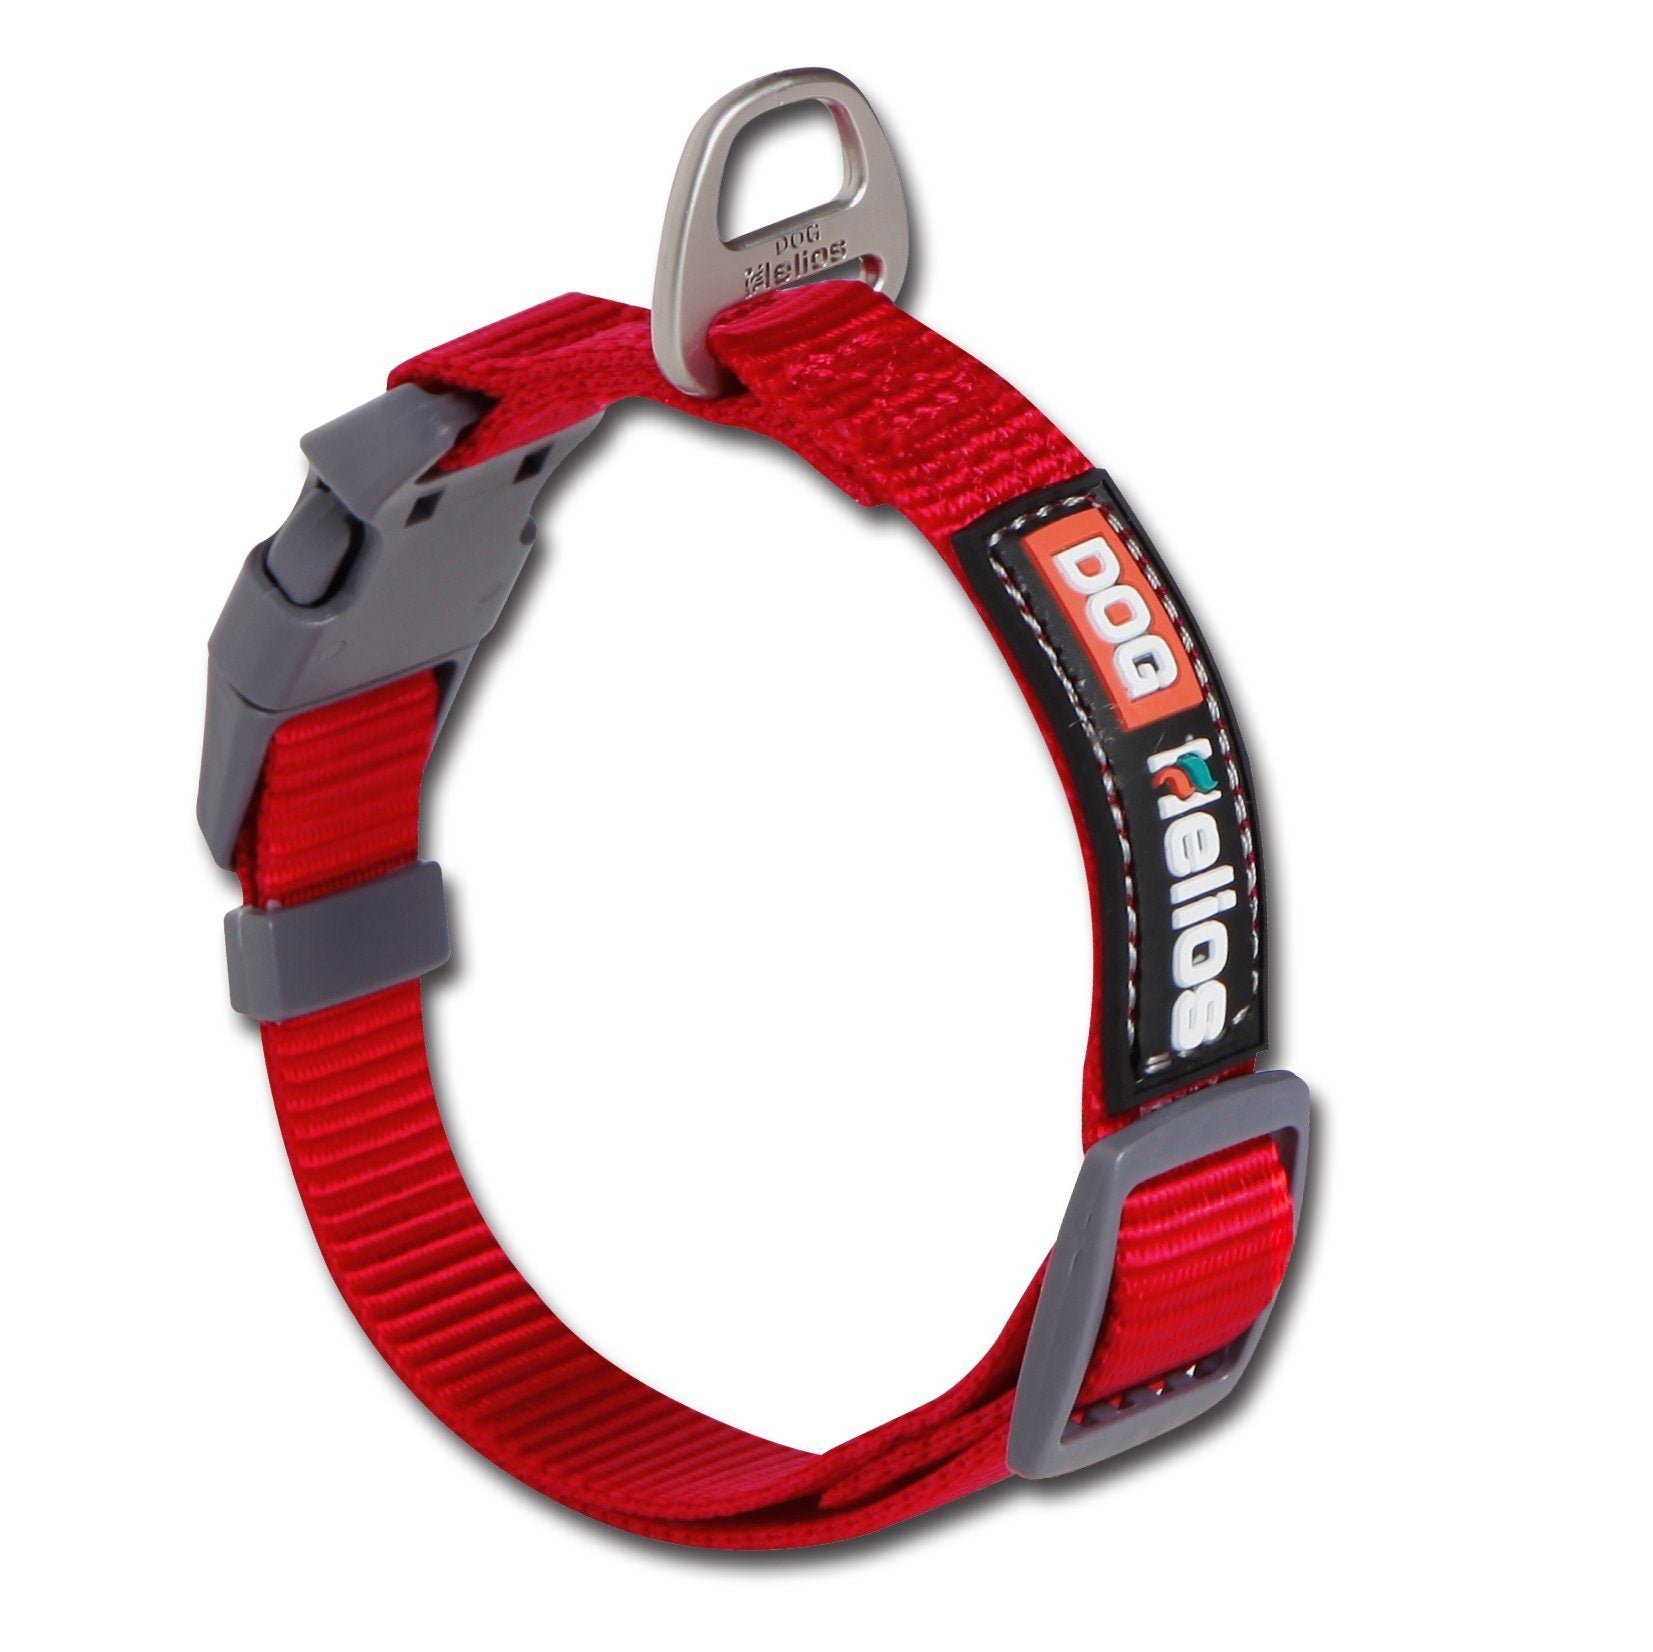 Dog Helios Sporty Nylon Leash and Collar Small Red